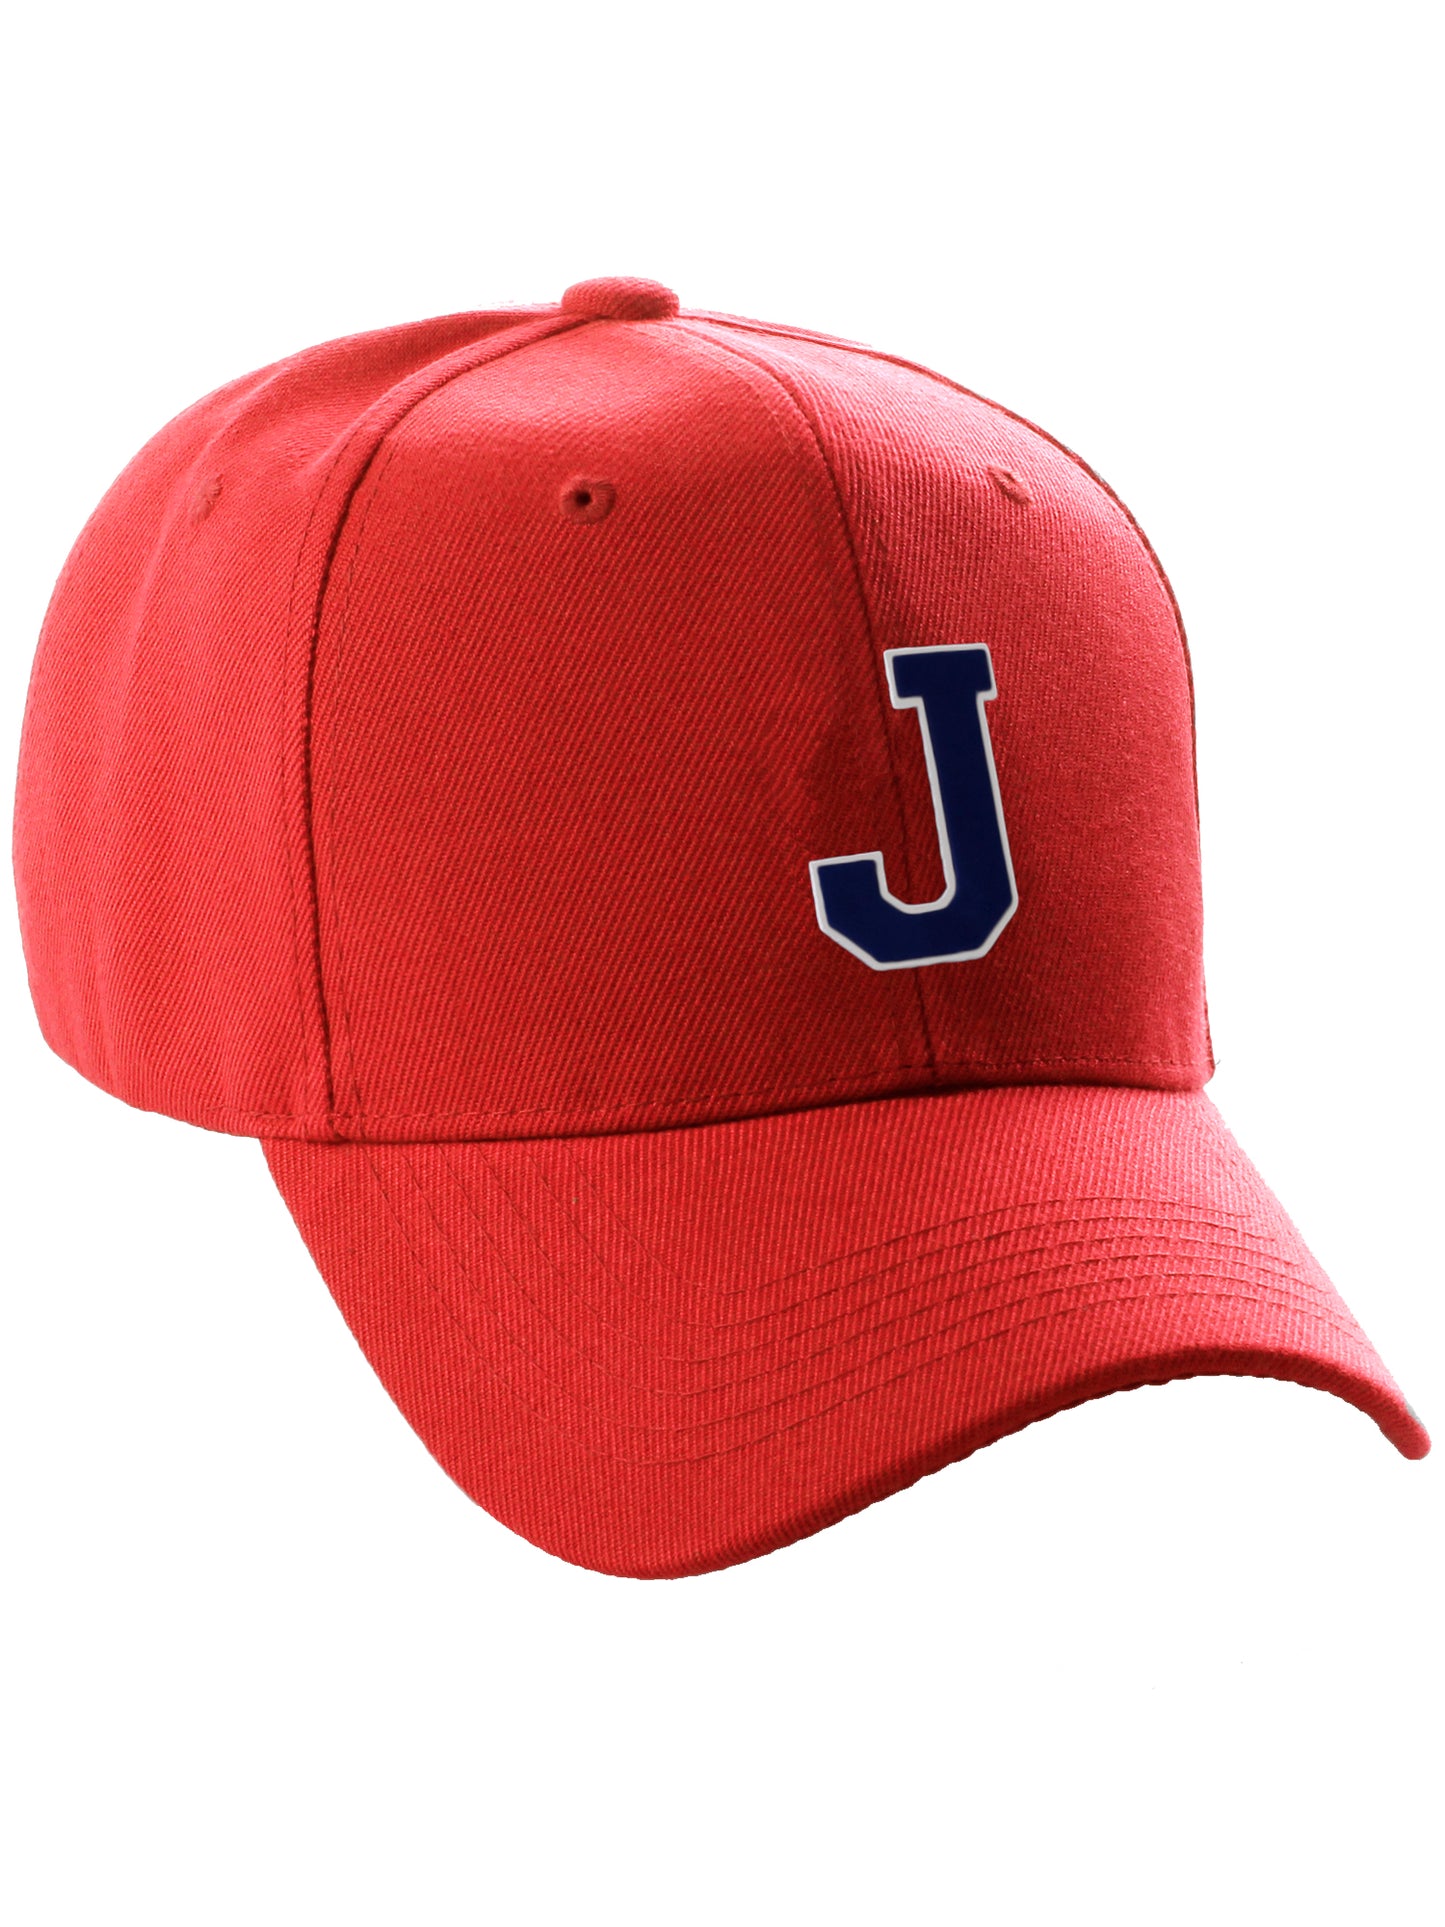 Classic Baseball Hat Custom A to Z Initial Team Letter, Navy Cap